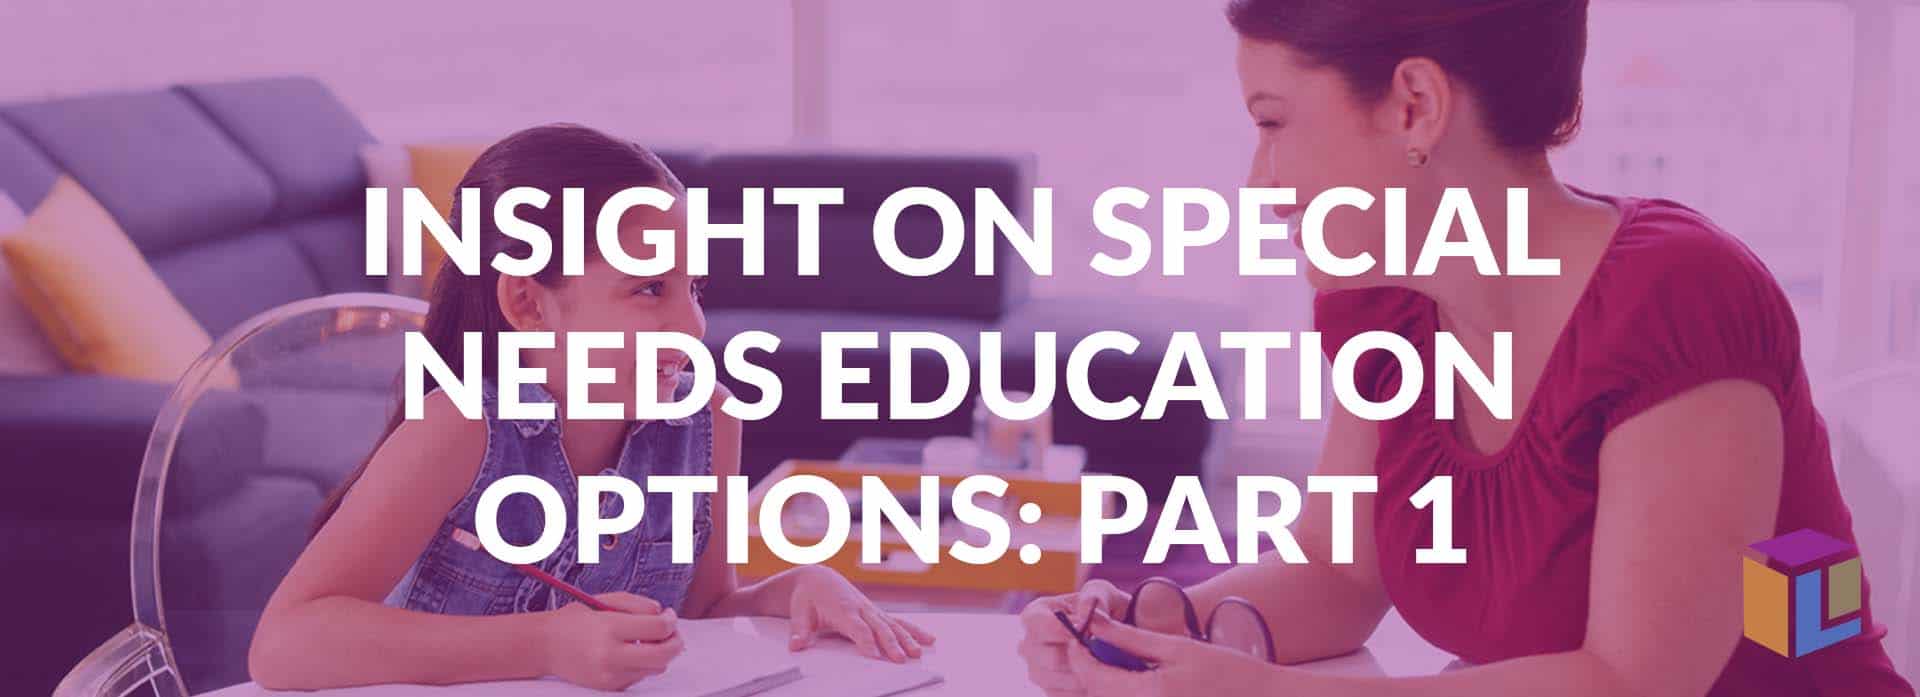 Insight On Special Needs Education Options: Part 1